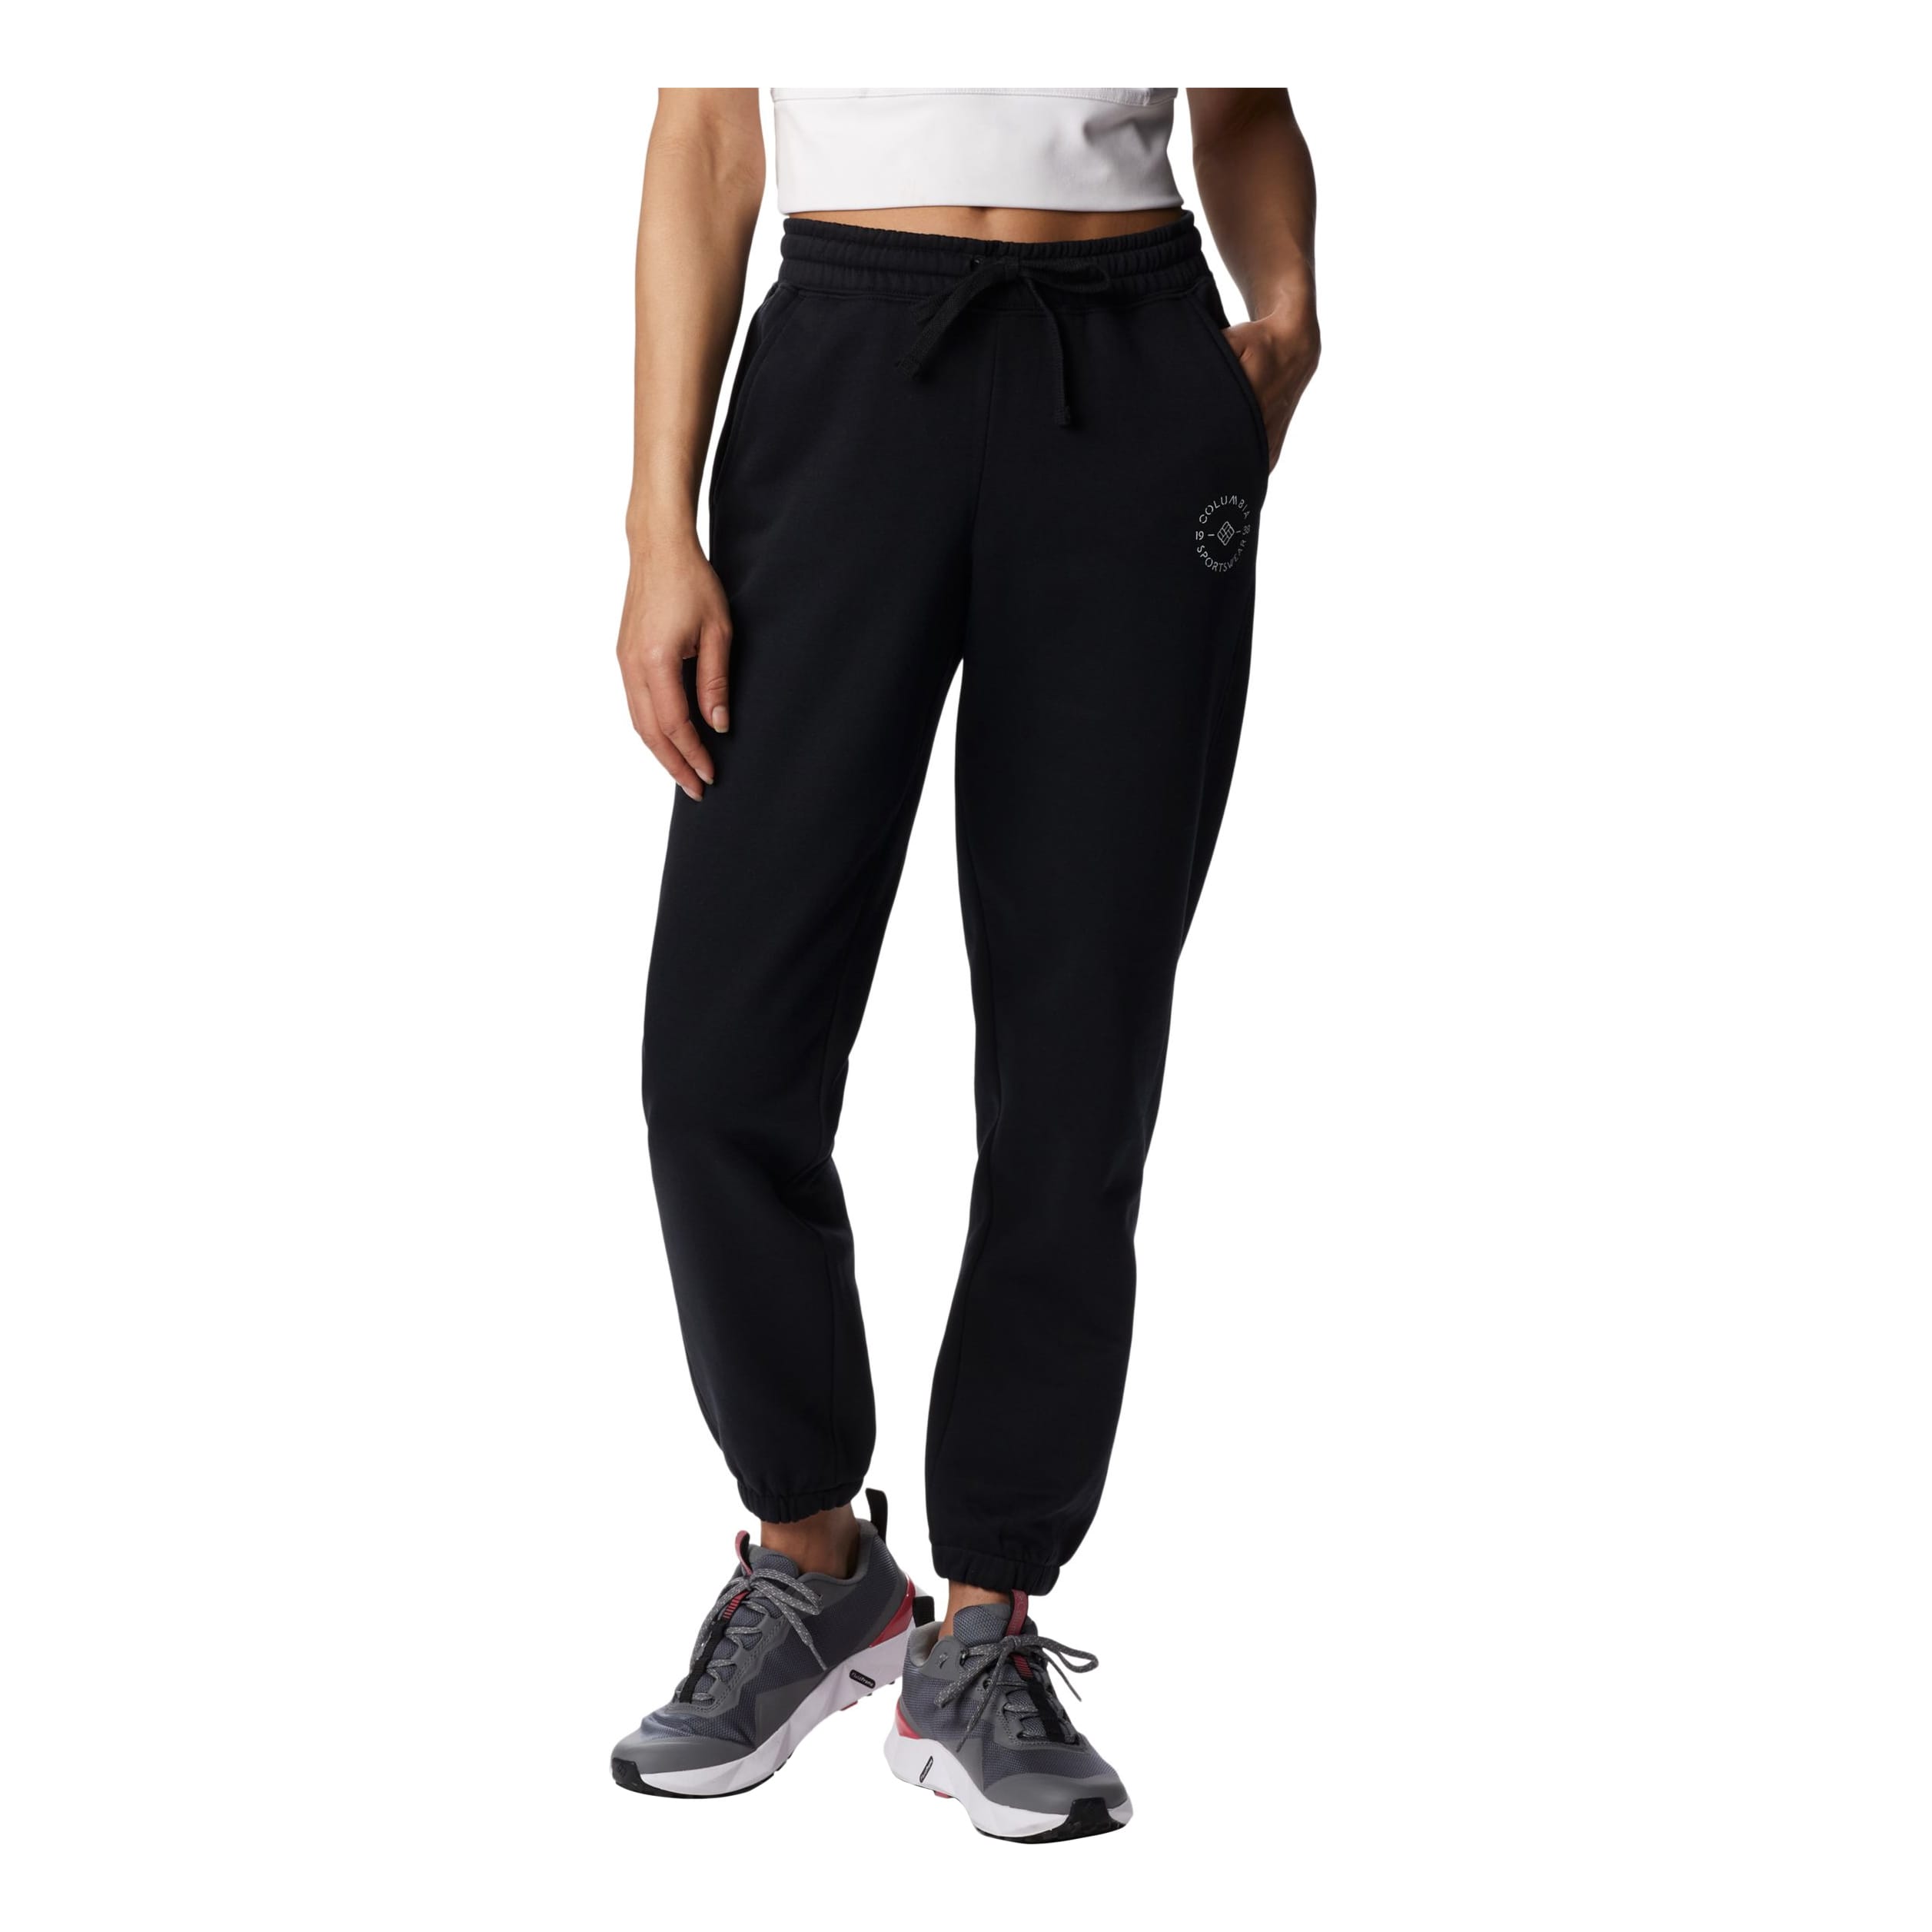  THE NORTH FACE Women's Aphrodite Motion Capri Pants (Standard  and Plus Size), Twill Beige, X-Small : Clothing, Shoes & Jewelry